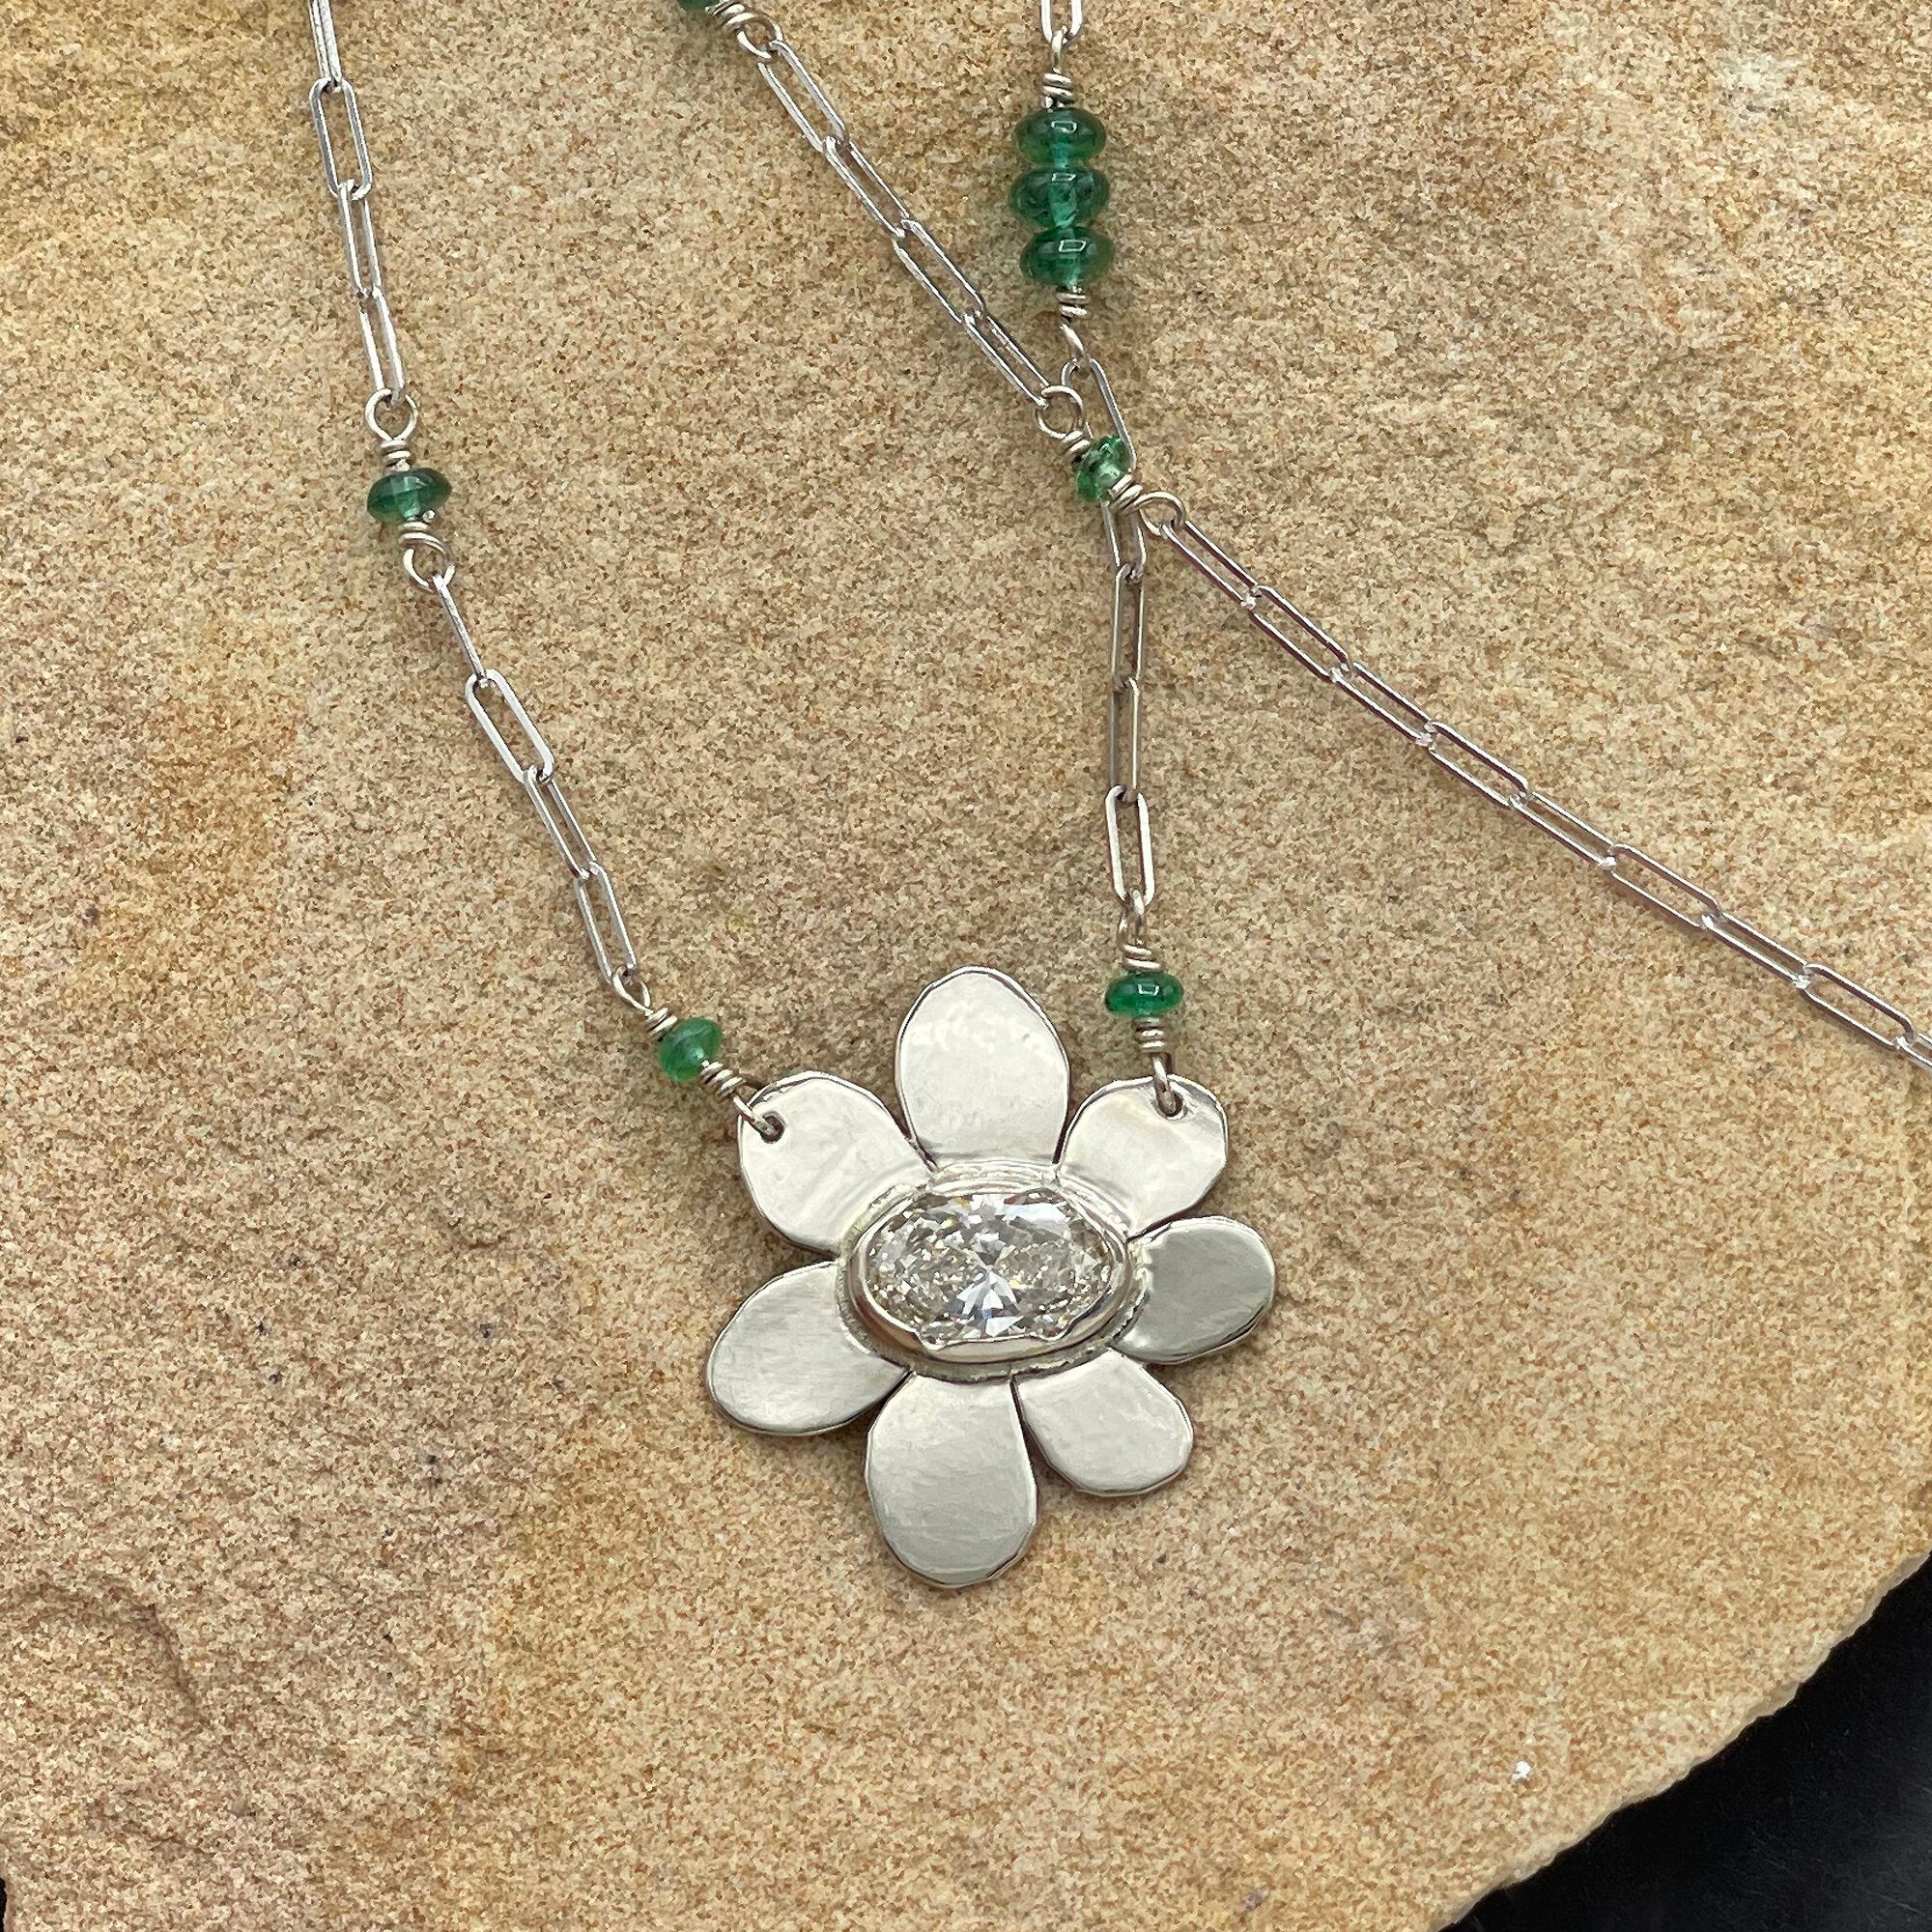 14K Diamond Flower Necklace, 1 ct GIA Diamond Solid White gold and Emerald